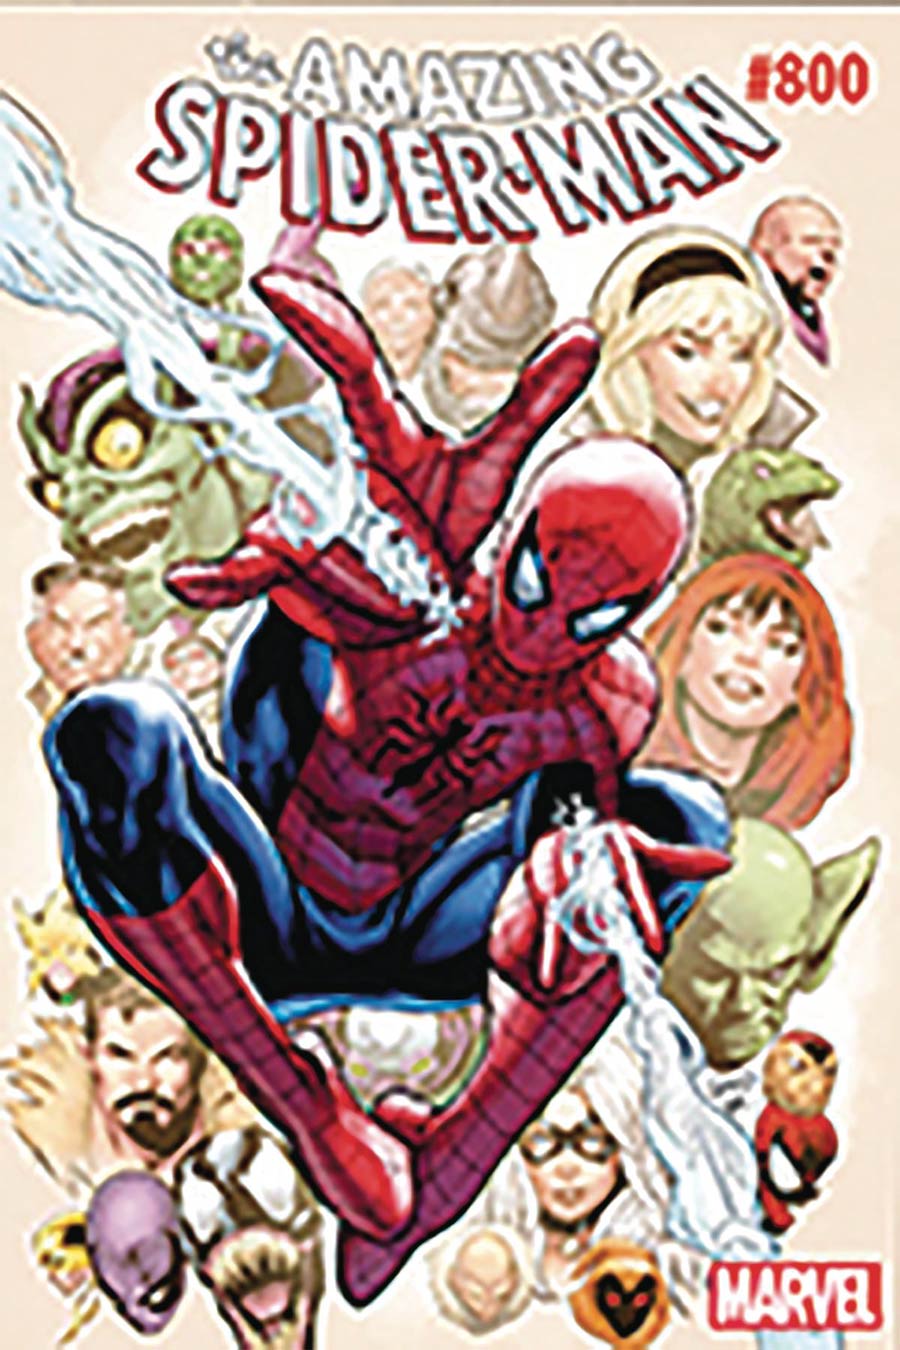 Amazing Spider-Man Vol 4 #800 Cover Z-G DF Variant Greg Land Cover Signed By Greg Land